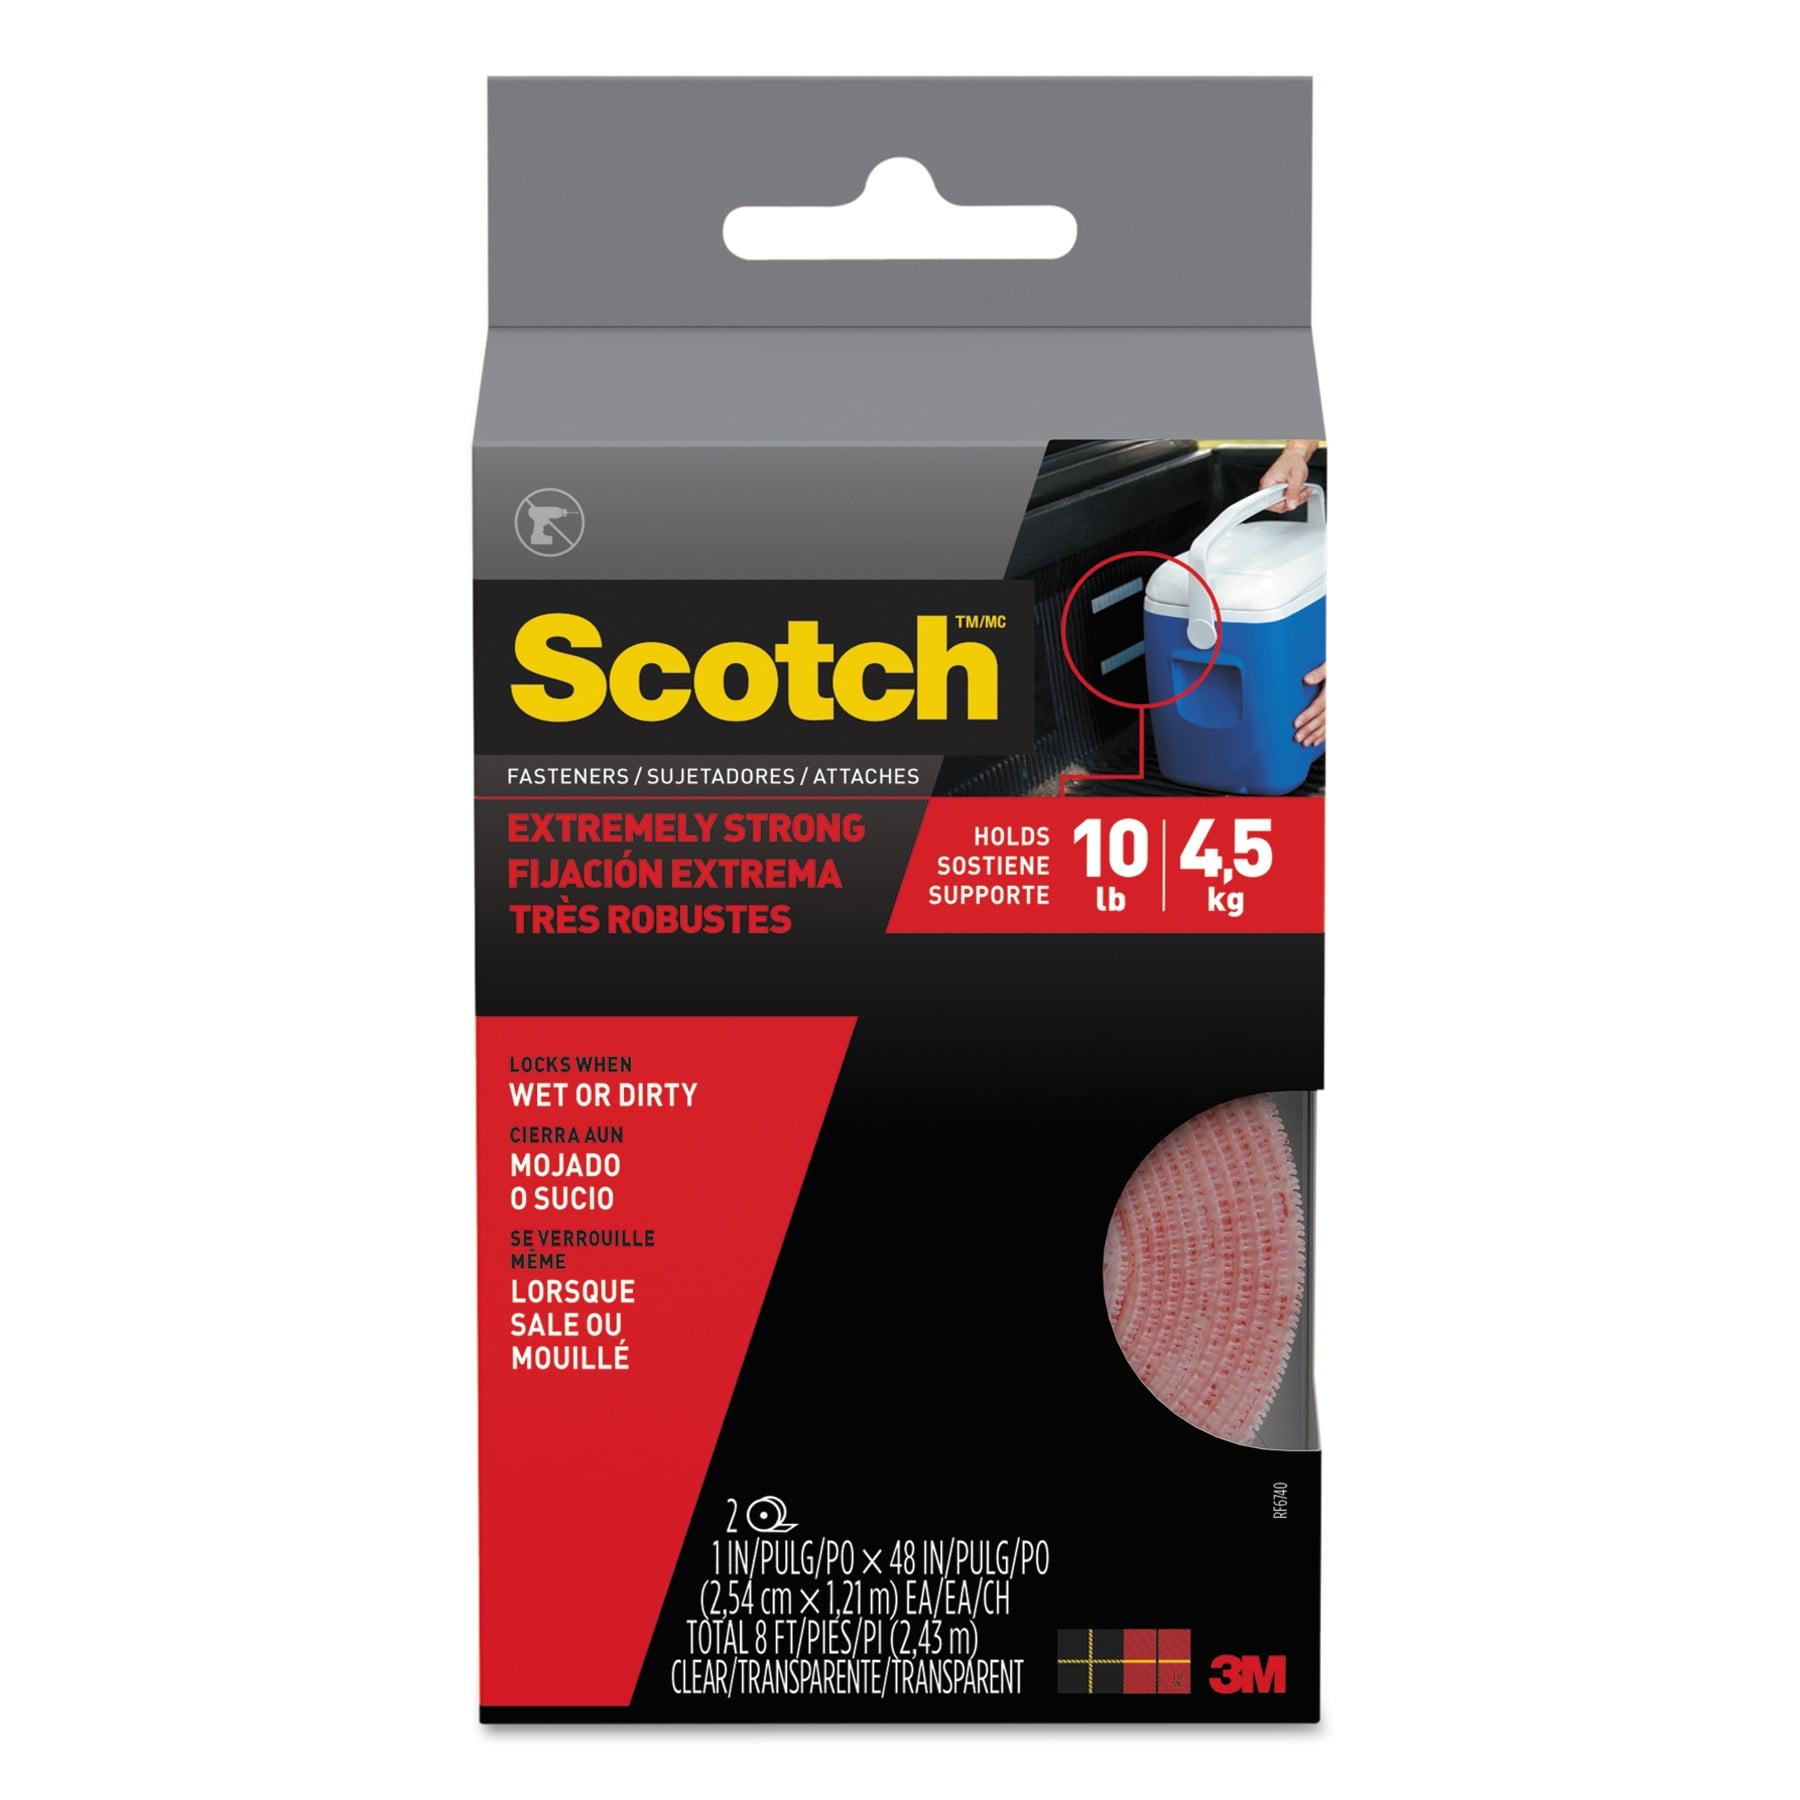 Two Pack Extreme Black Fasteners 54 qty SCOTCH 1"x 1" 2-10 lbs 